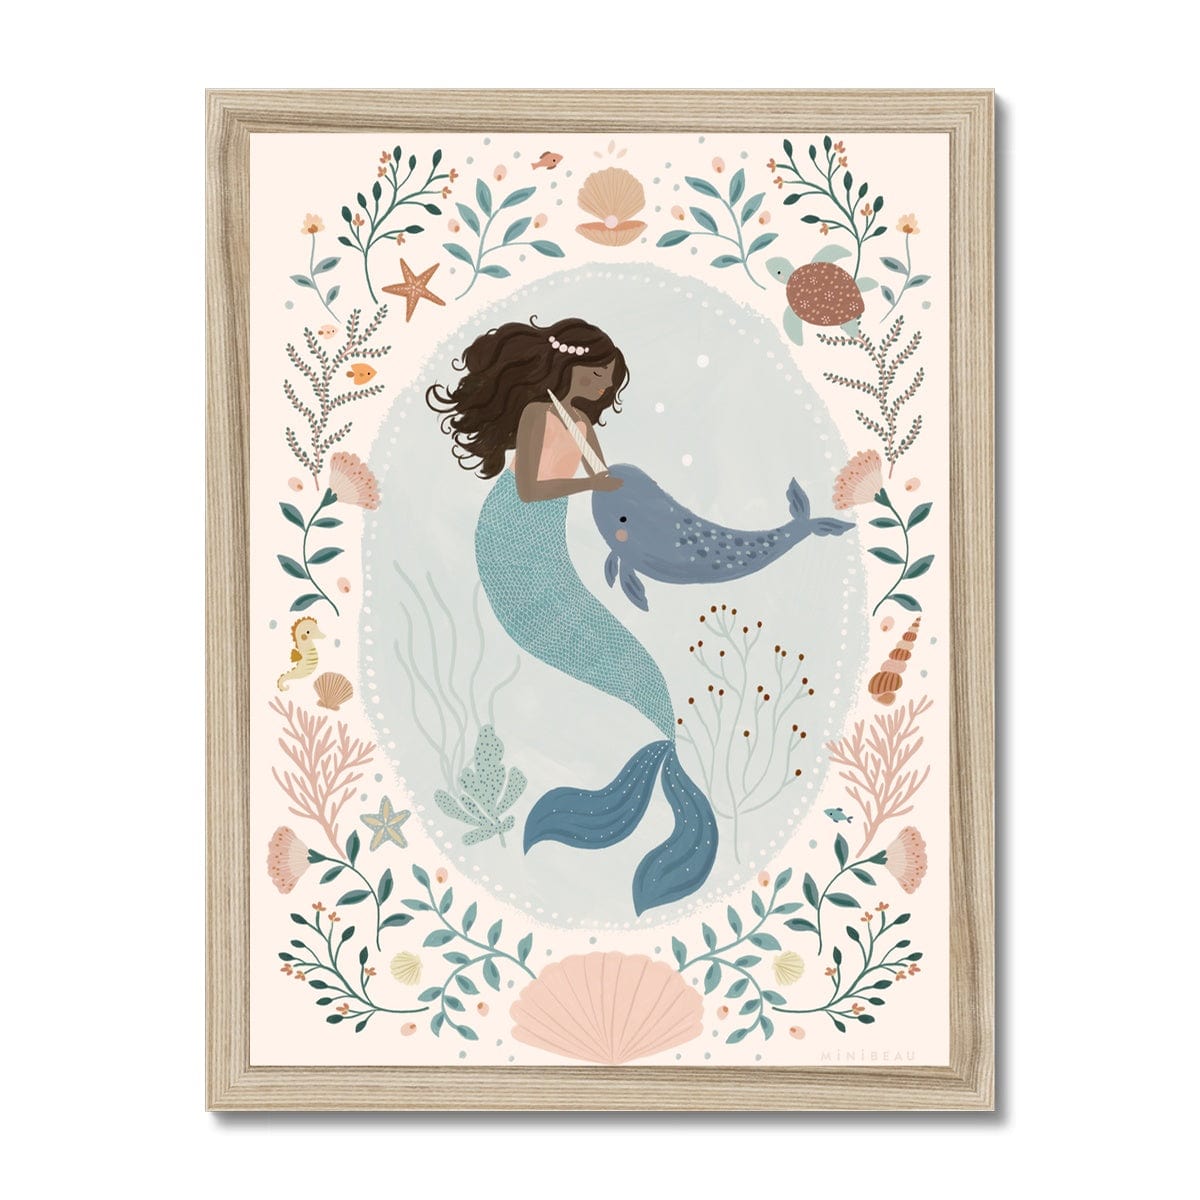 Beautiful dark skinned and haired mermaid with a pearl headband petting her friend Narwhal within a pale teal coloured oval background with white dots round the edge. On the outside of the oval is a sea themed border on a neutral background. The border consists of foliage, flowers and items you would find at the bottom of the sea, shells, turtle, sea horse with a large clam shell at the bottom, in a natural wood frame